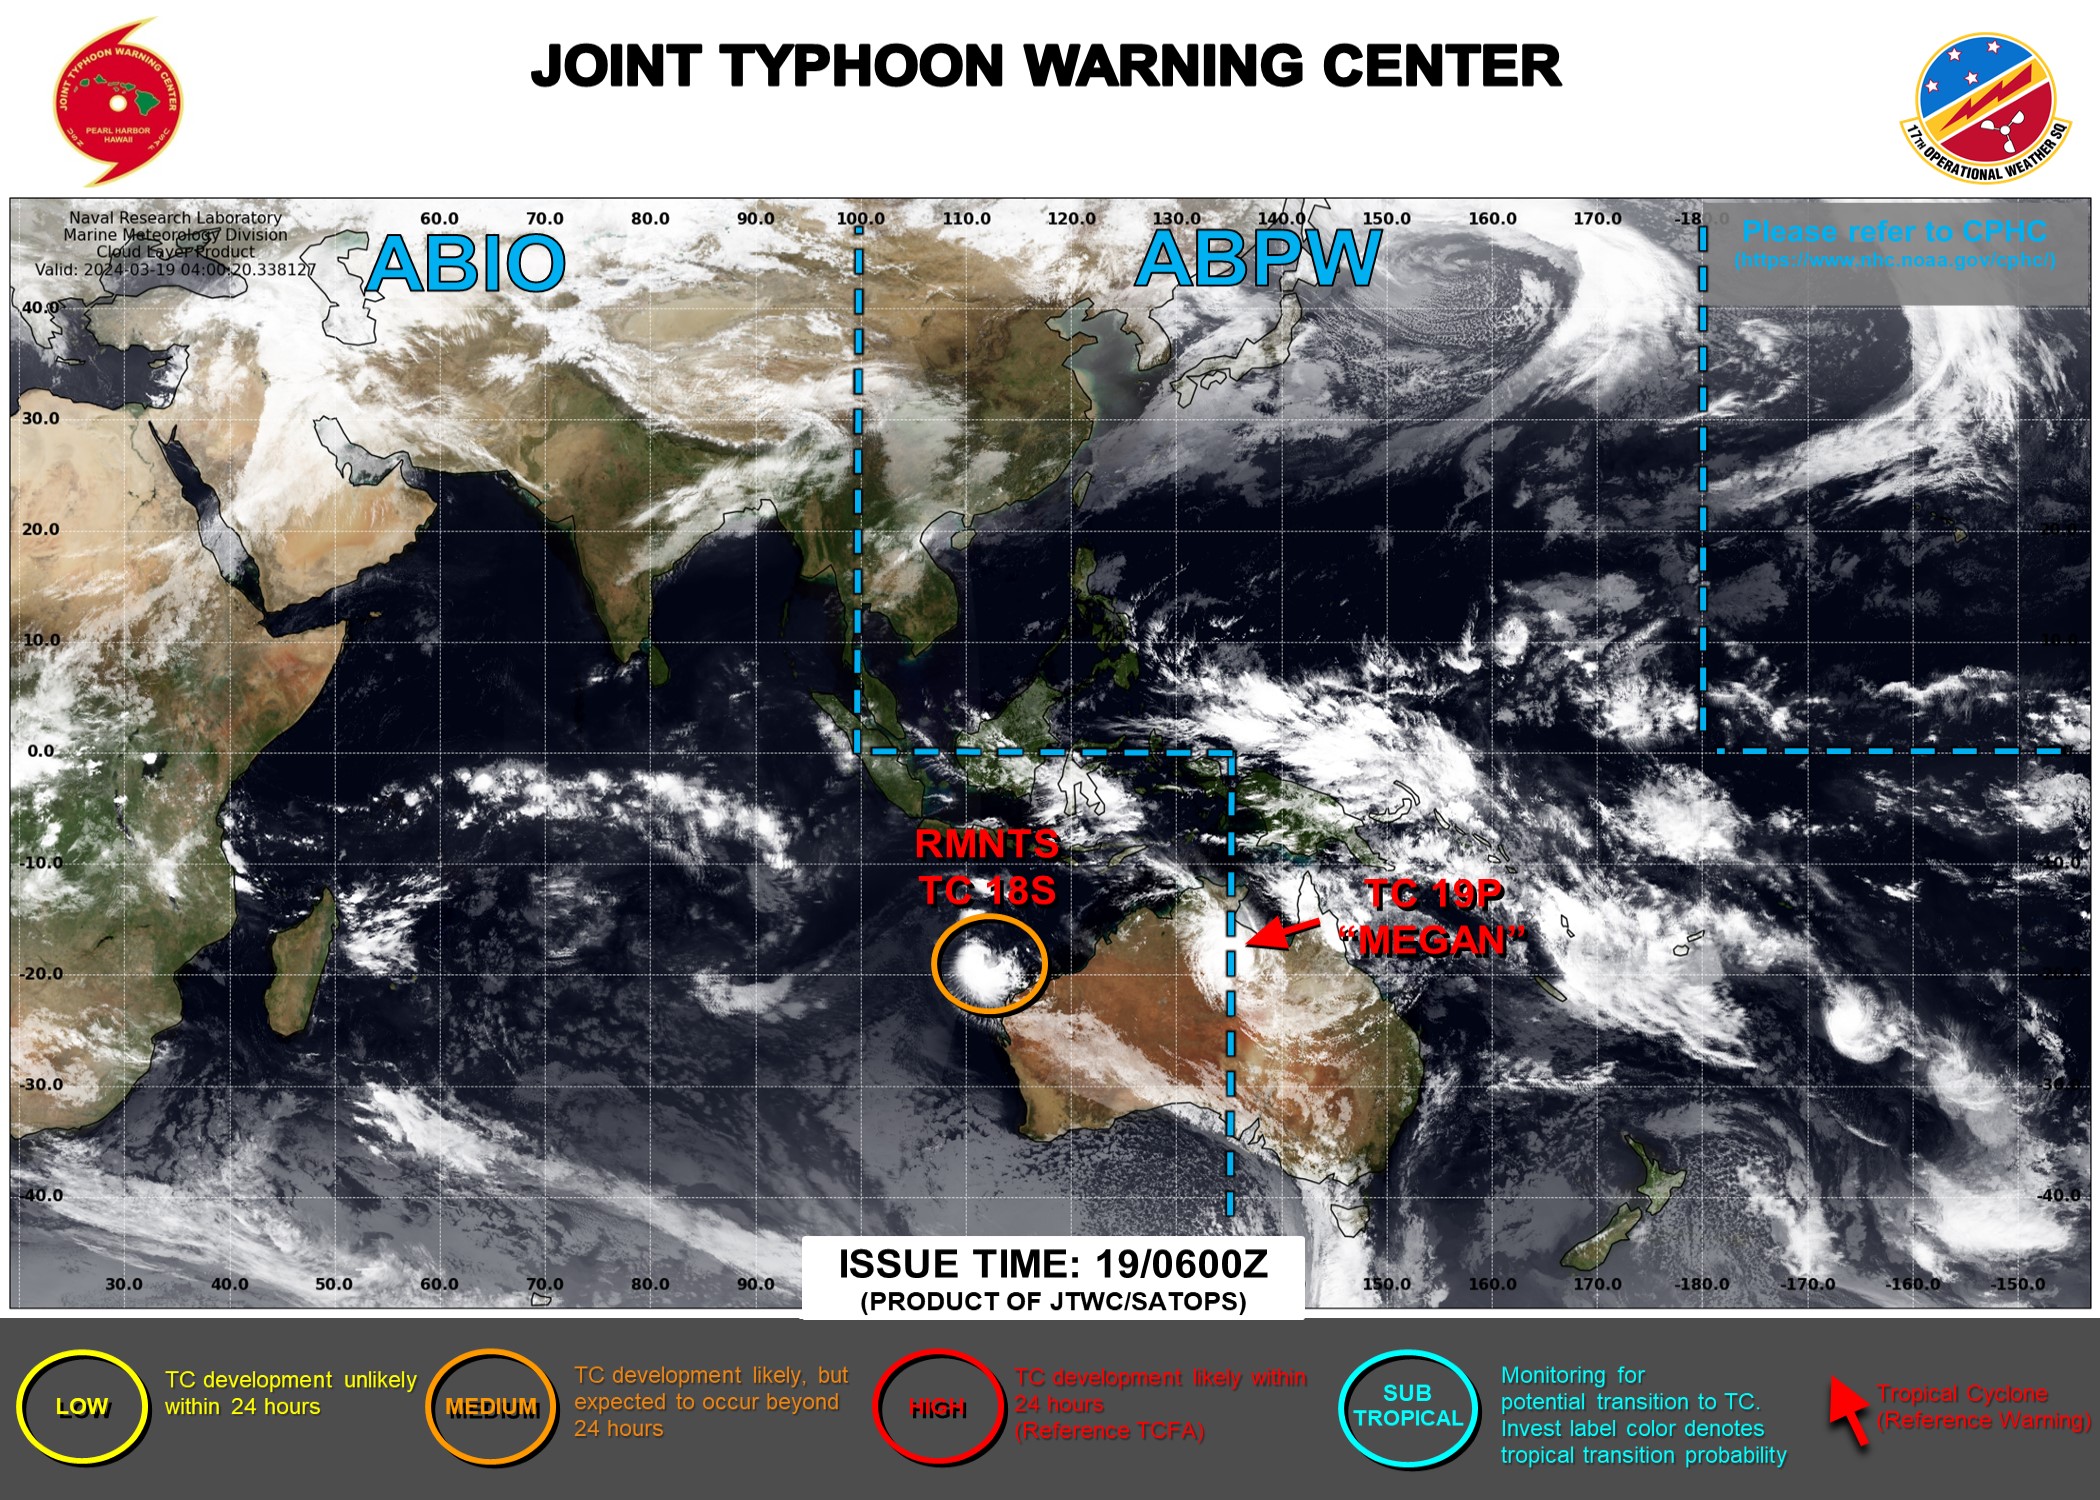 JTWC IS ISSUING 3HOURLY SATELLITE BULLETINS ON THE REMNANTS OF TC 18S AND ON THE REMNANTS OF TC 19P NOW LOCATED OVER-LAND